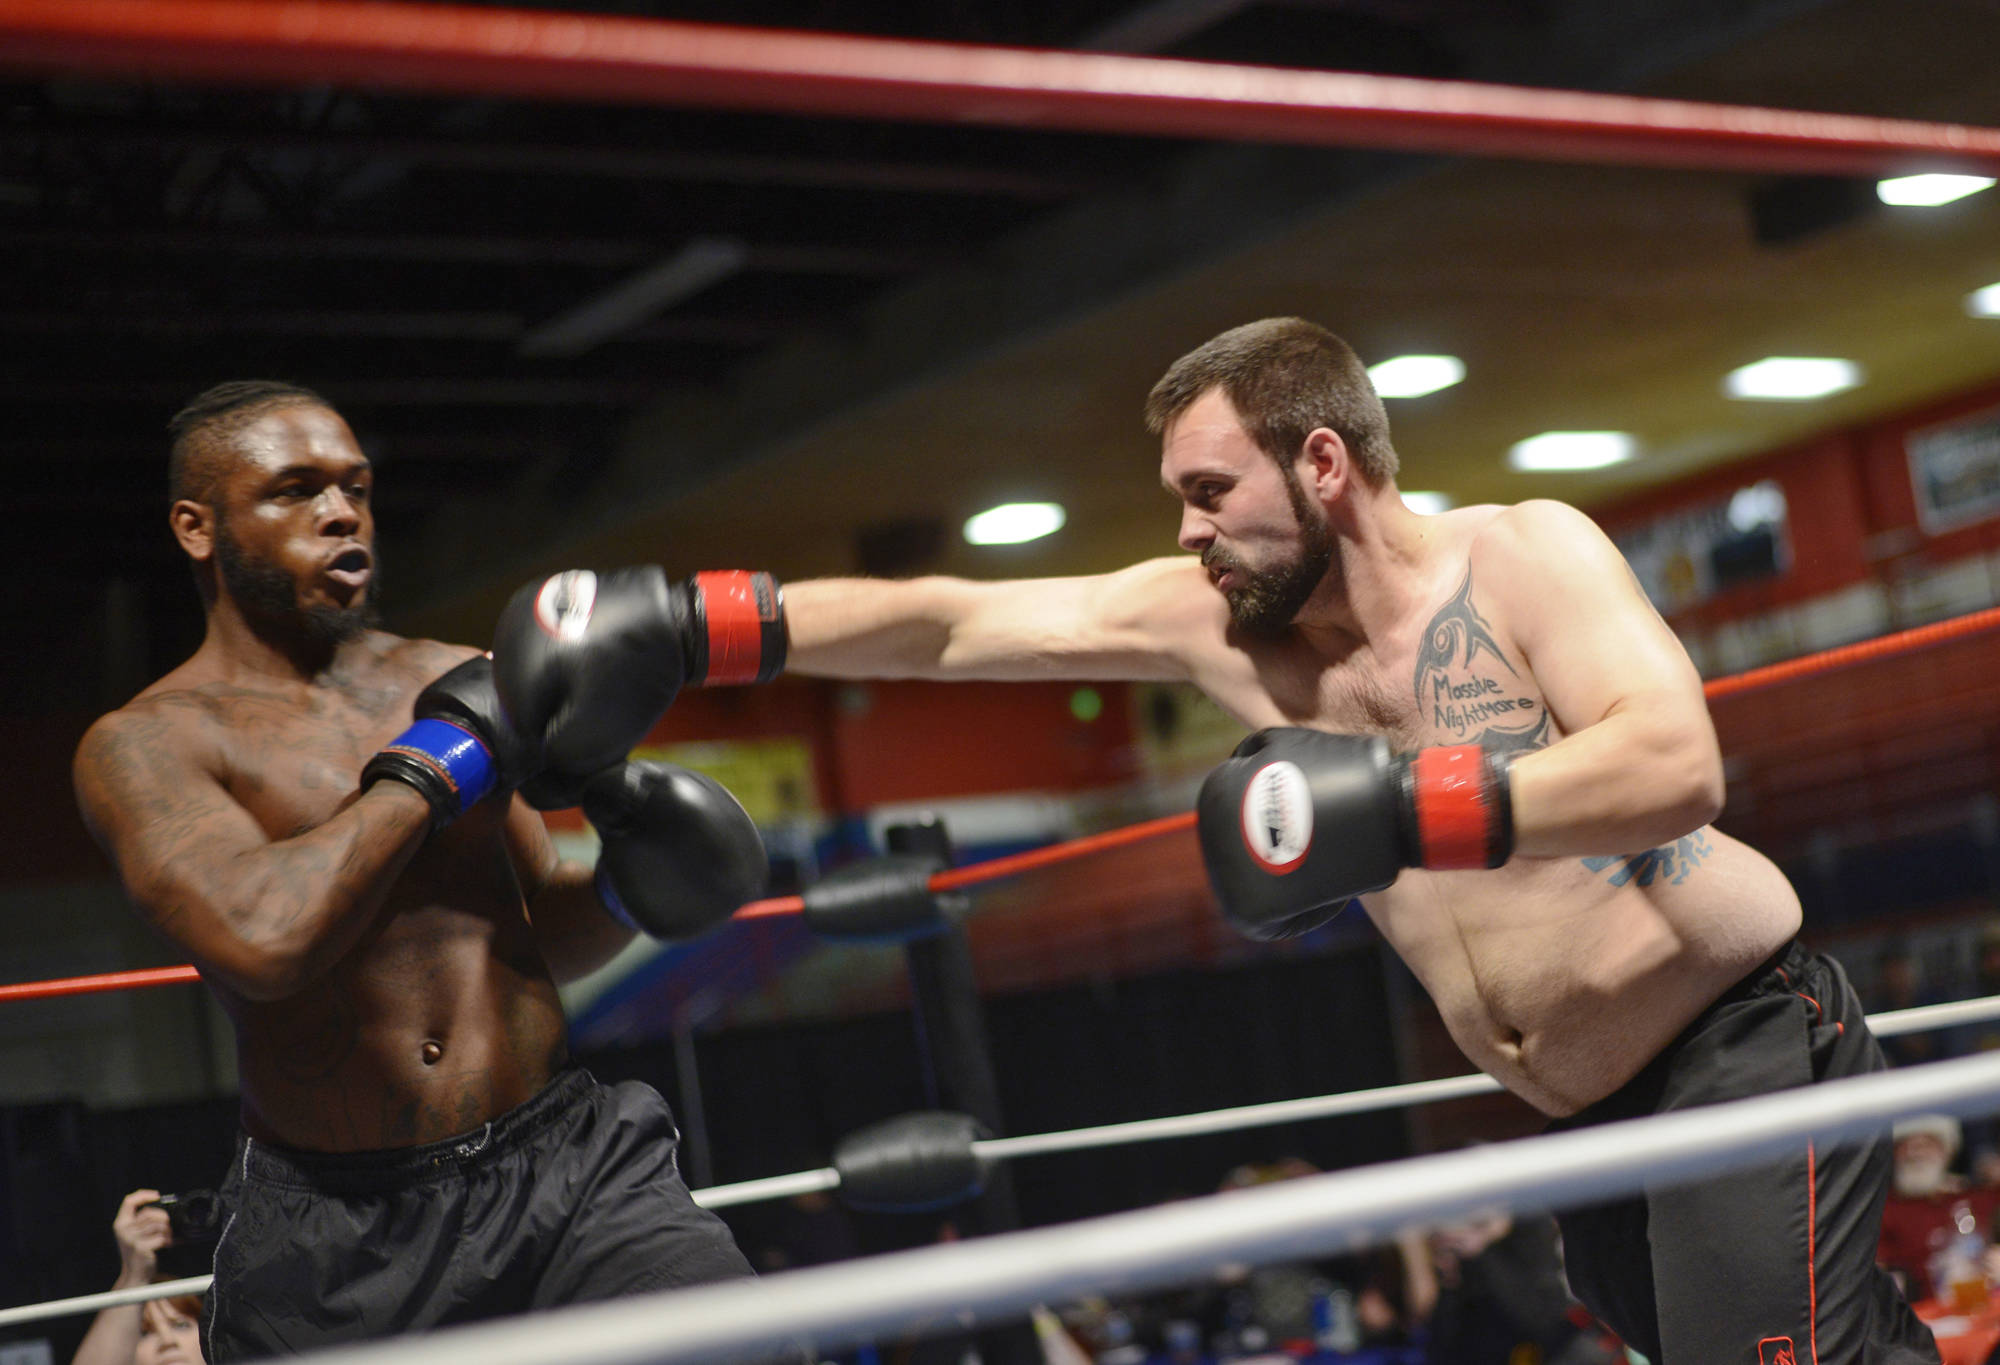 Melvin Clark, Jr., (left) evades a swing from fellow Nikiski fighter Doug McFresh in a boxing match Saturday night at the Fight Before Christmas 2 at the Soldotna Regional Sports Complex. (Photo by Ben Boettger/Peninsula Clarion)